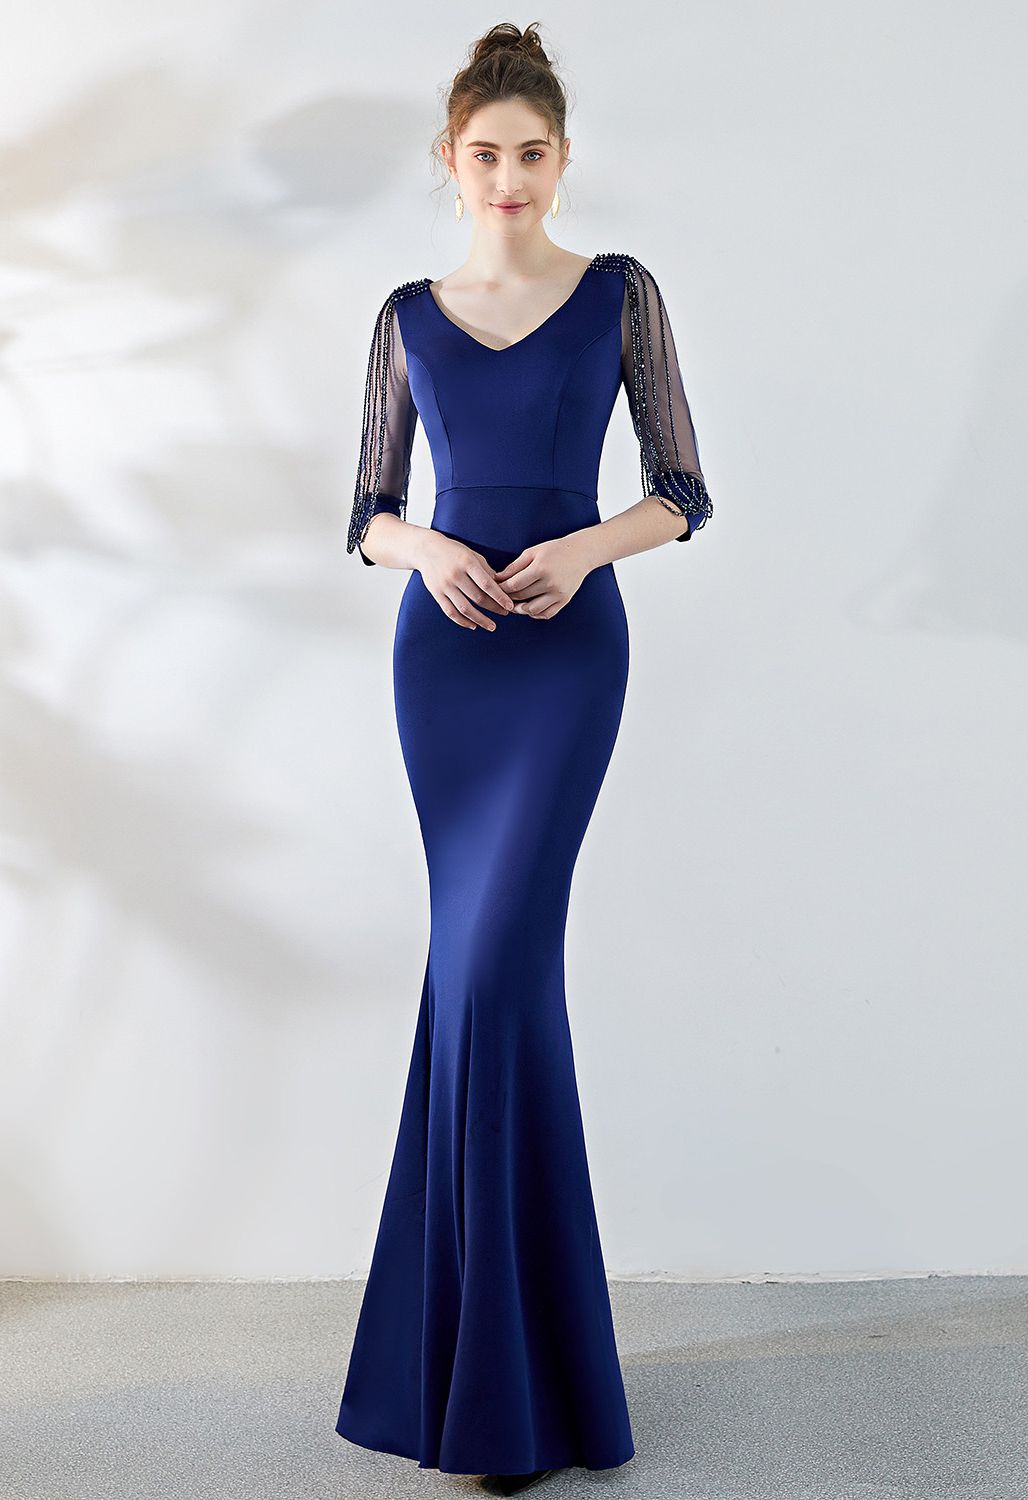 Draped Bead Mesh Sleeve Gown in Navy - Retro, Indie and Unique Fashion